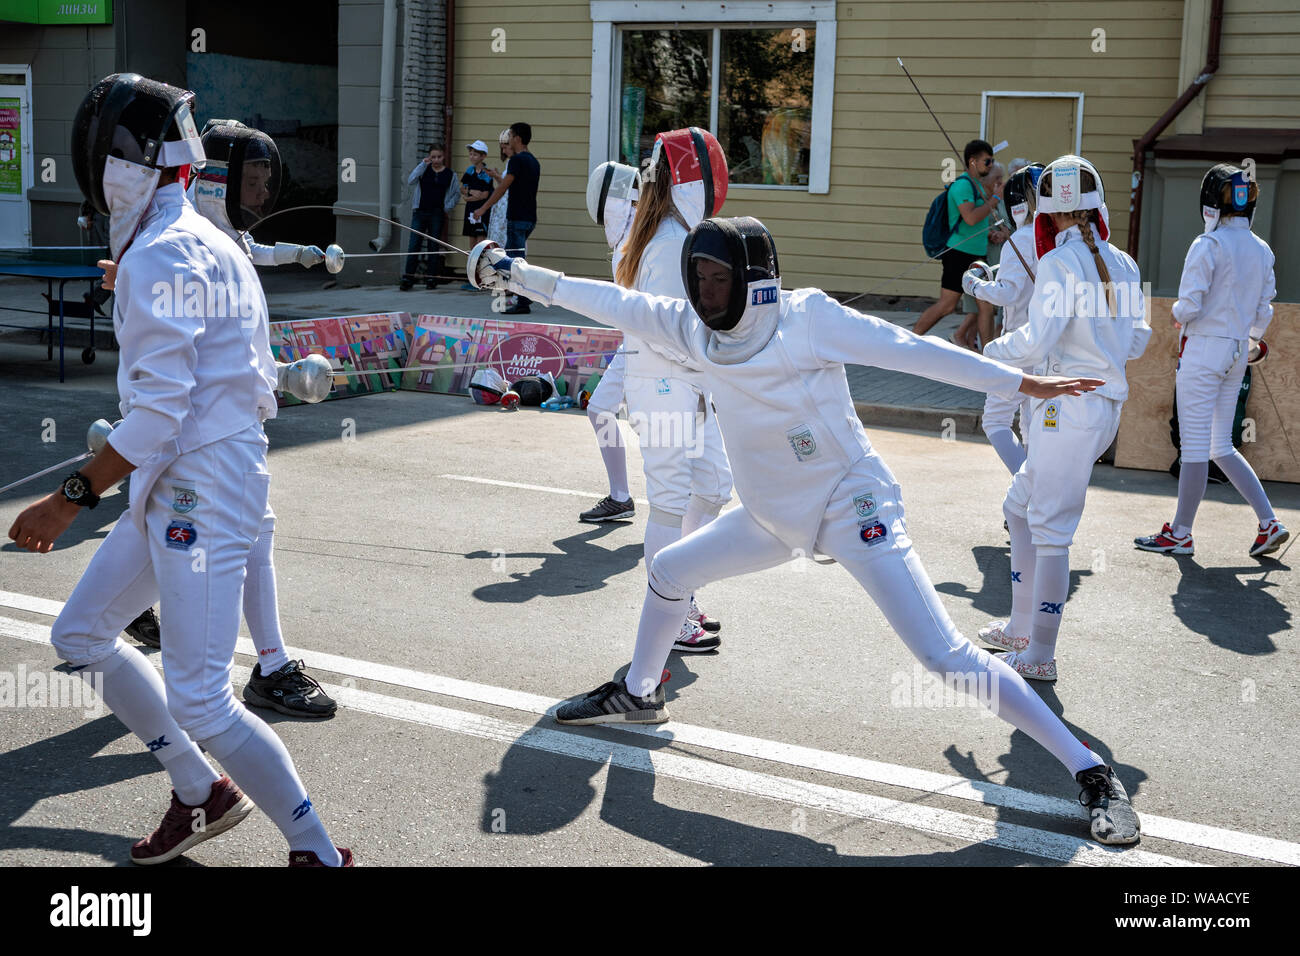 August 25, 2018 - Fencing in a street of Krasnoyarsk during the City Day, Siberia, Russia Stock Photo